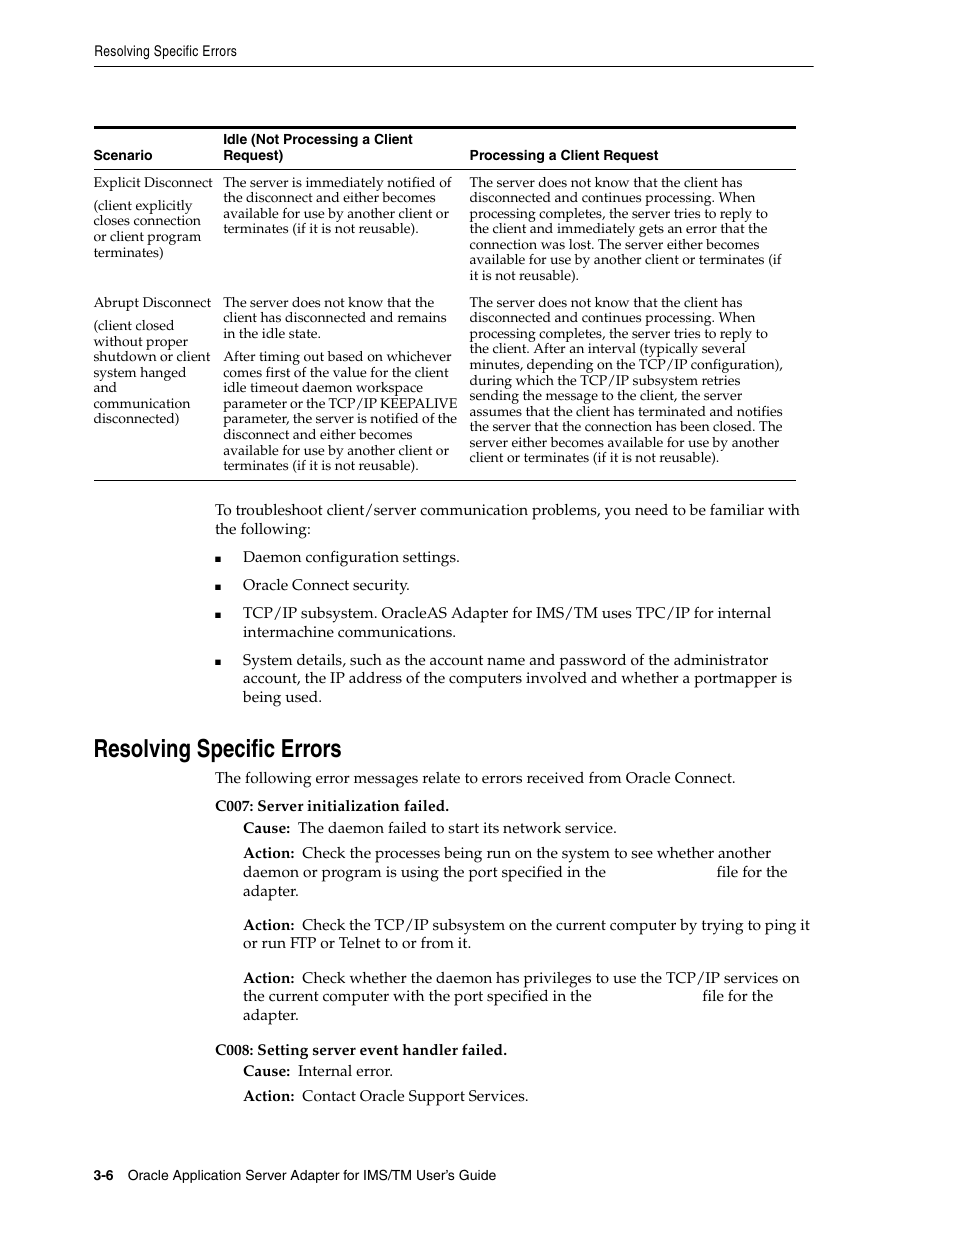 Resolving specific errors | Oracle Audio Technologies B31003-01 User Manual | Page 20 / 112